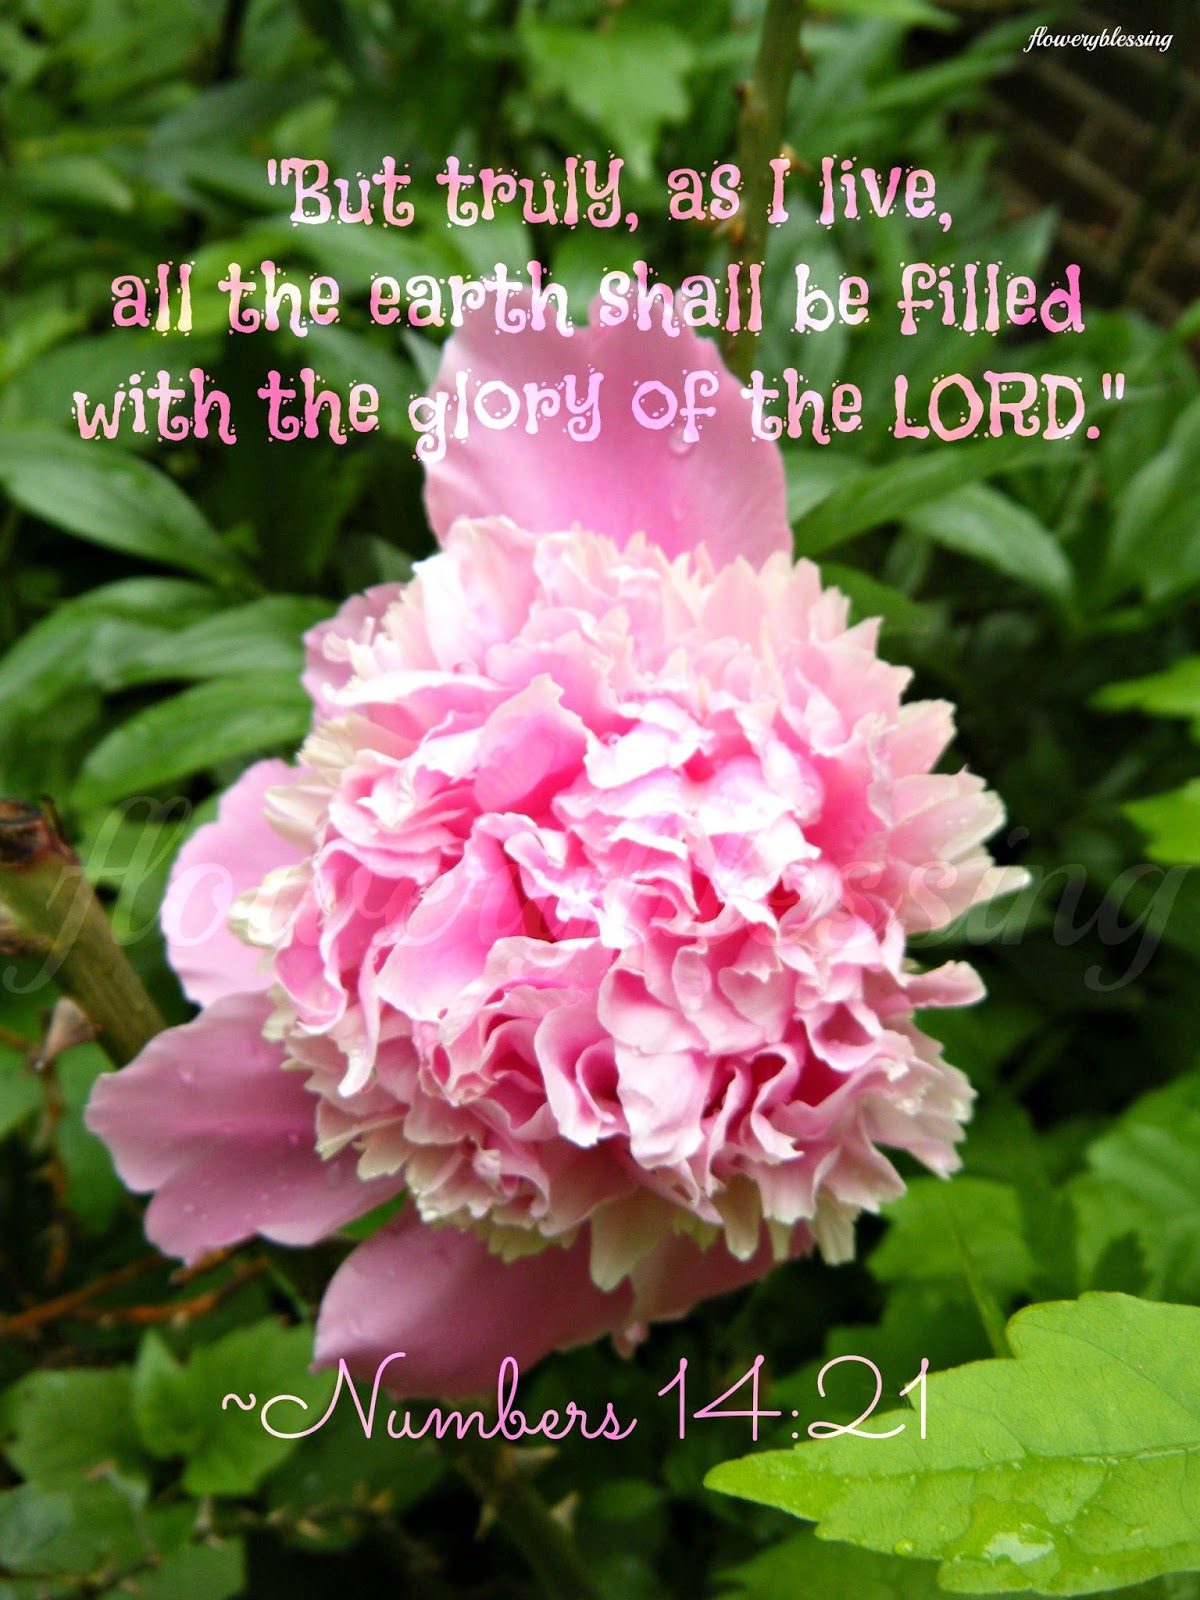 WORD STUDY – GOD WILL FILL THE EARTH